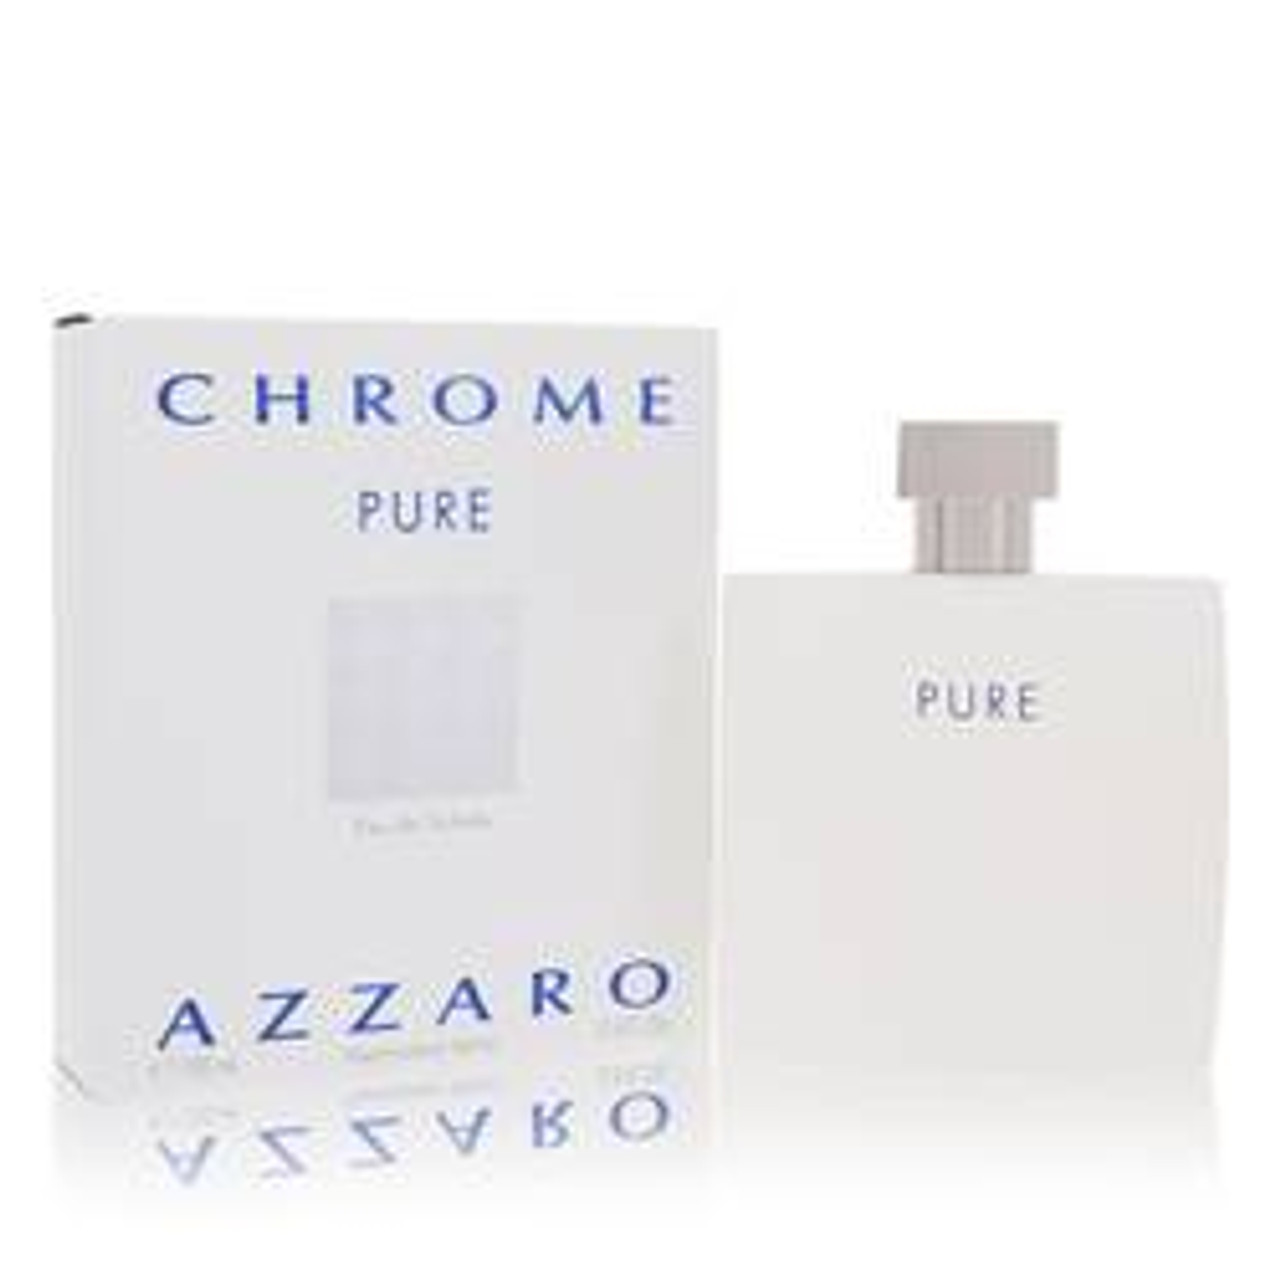 Chrome Pure Cologne By Azzaro Eau De Toilette Spray 3.4 oz for Men - [From 144.00 - Choose pk Qty ] - *Ships from Miami